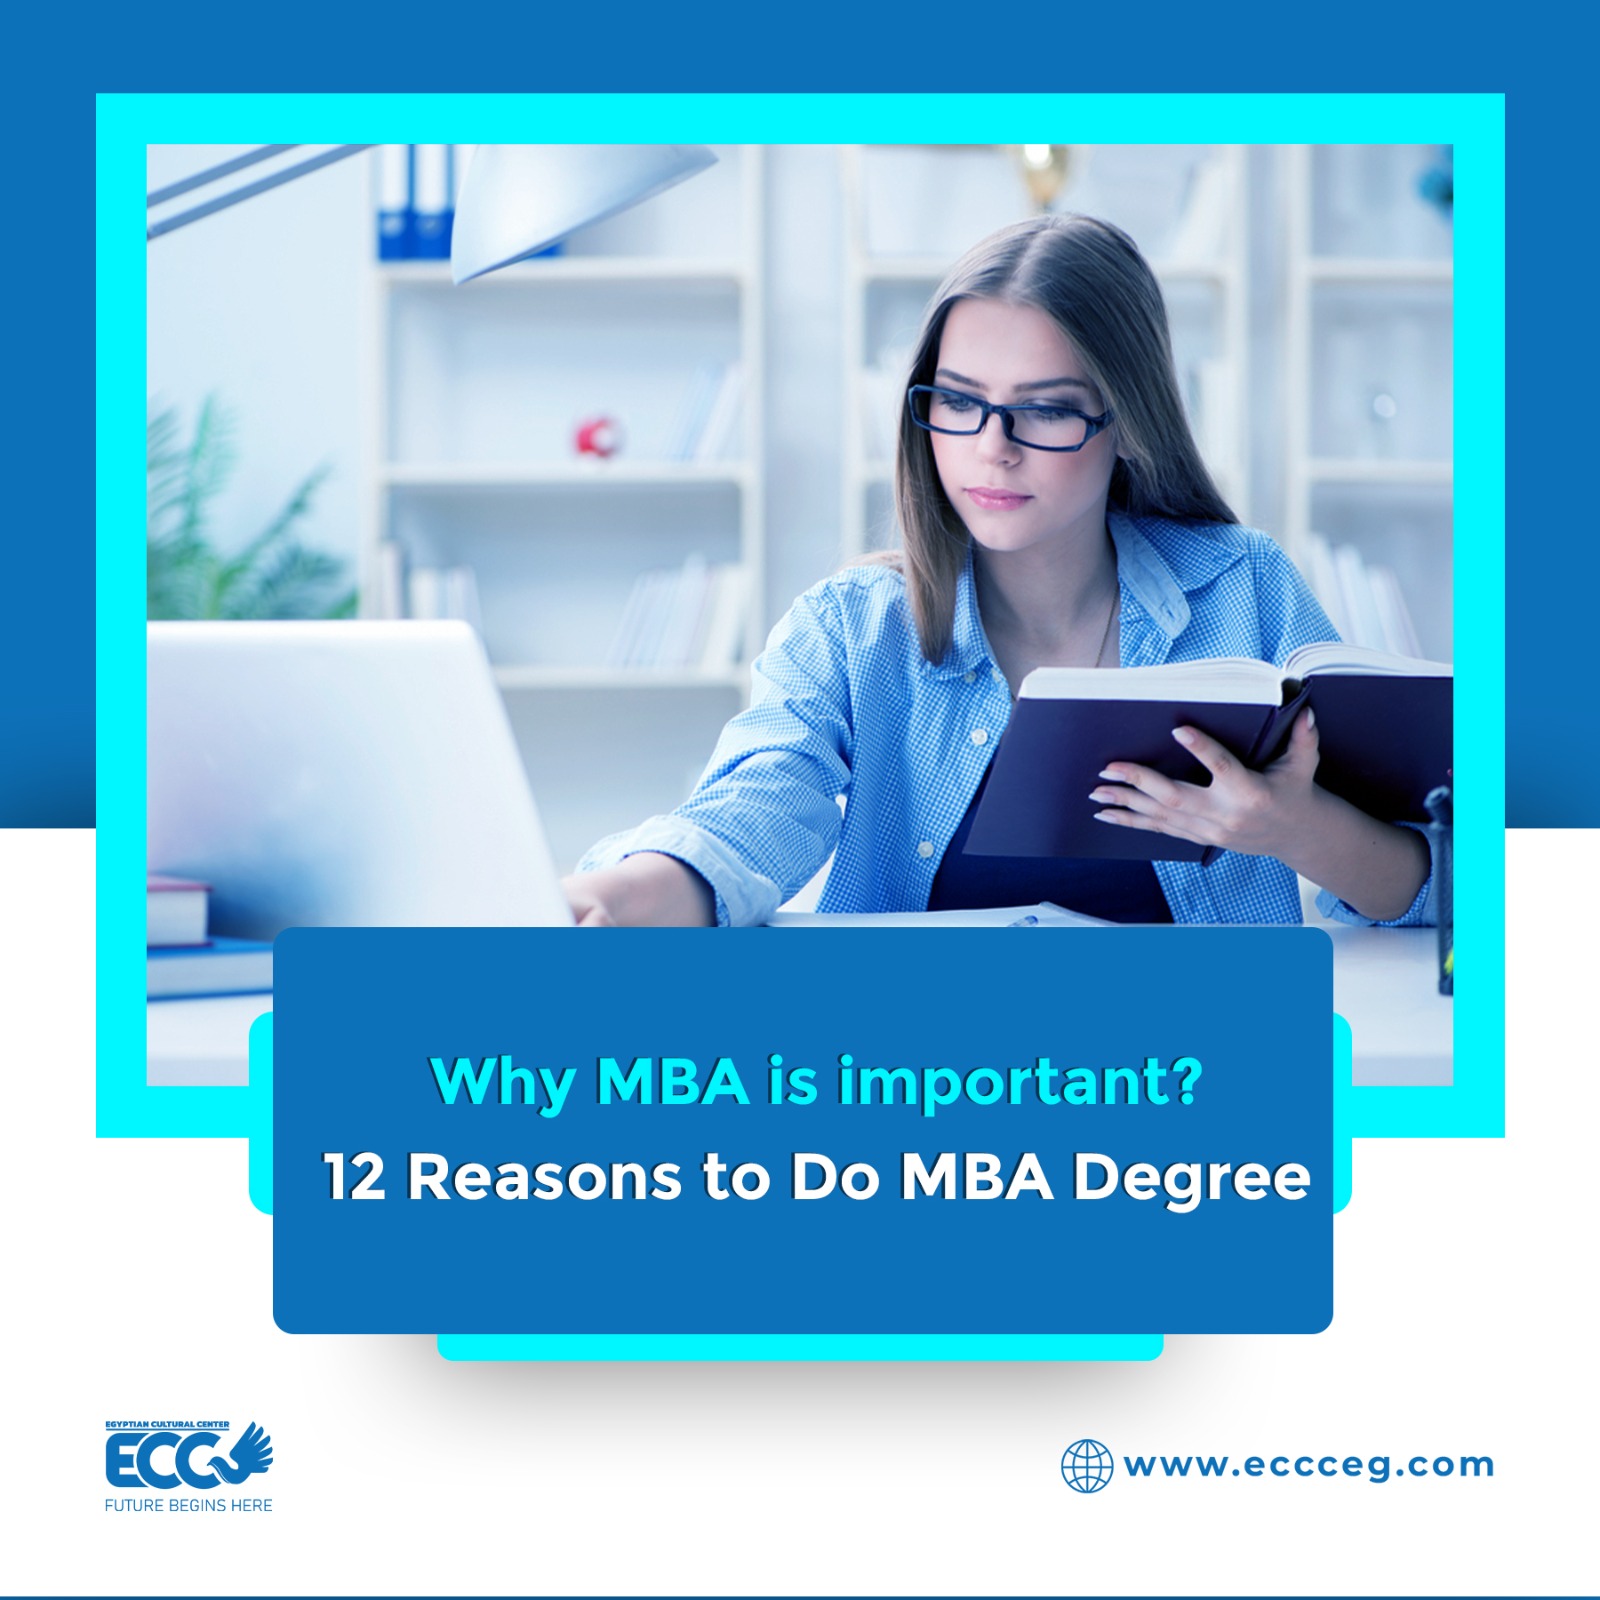 Why MBA is important?12 Reasons to Do MBA Degree